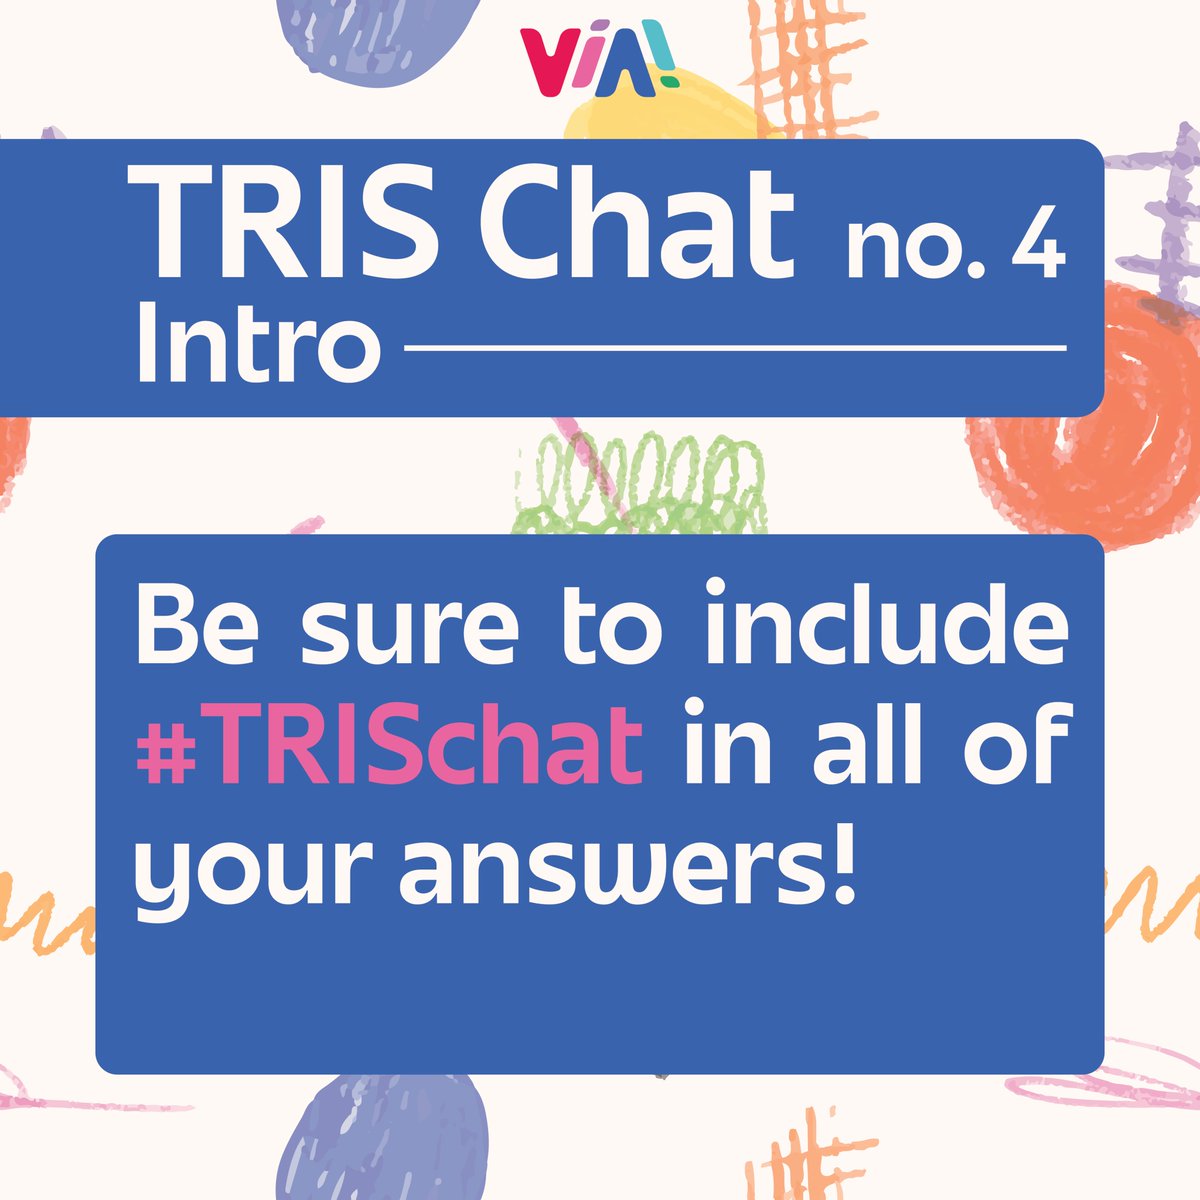 Be sure to include #TRISchat in all of your comments & answers during our #SlowChat !